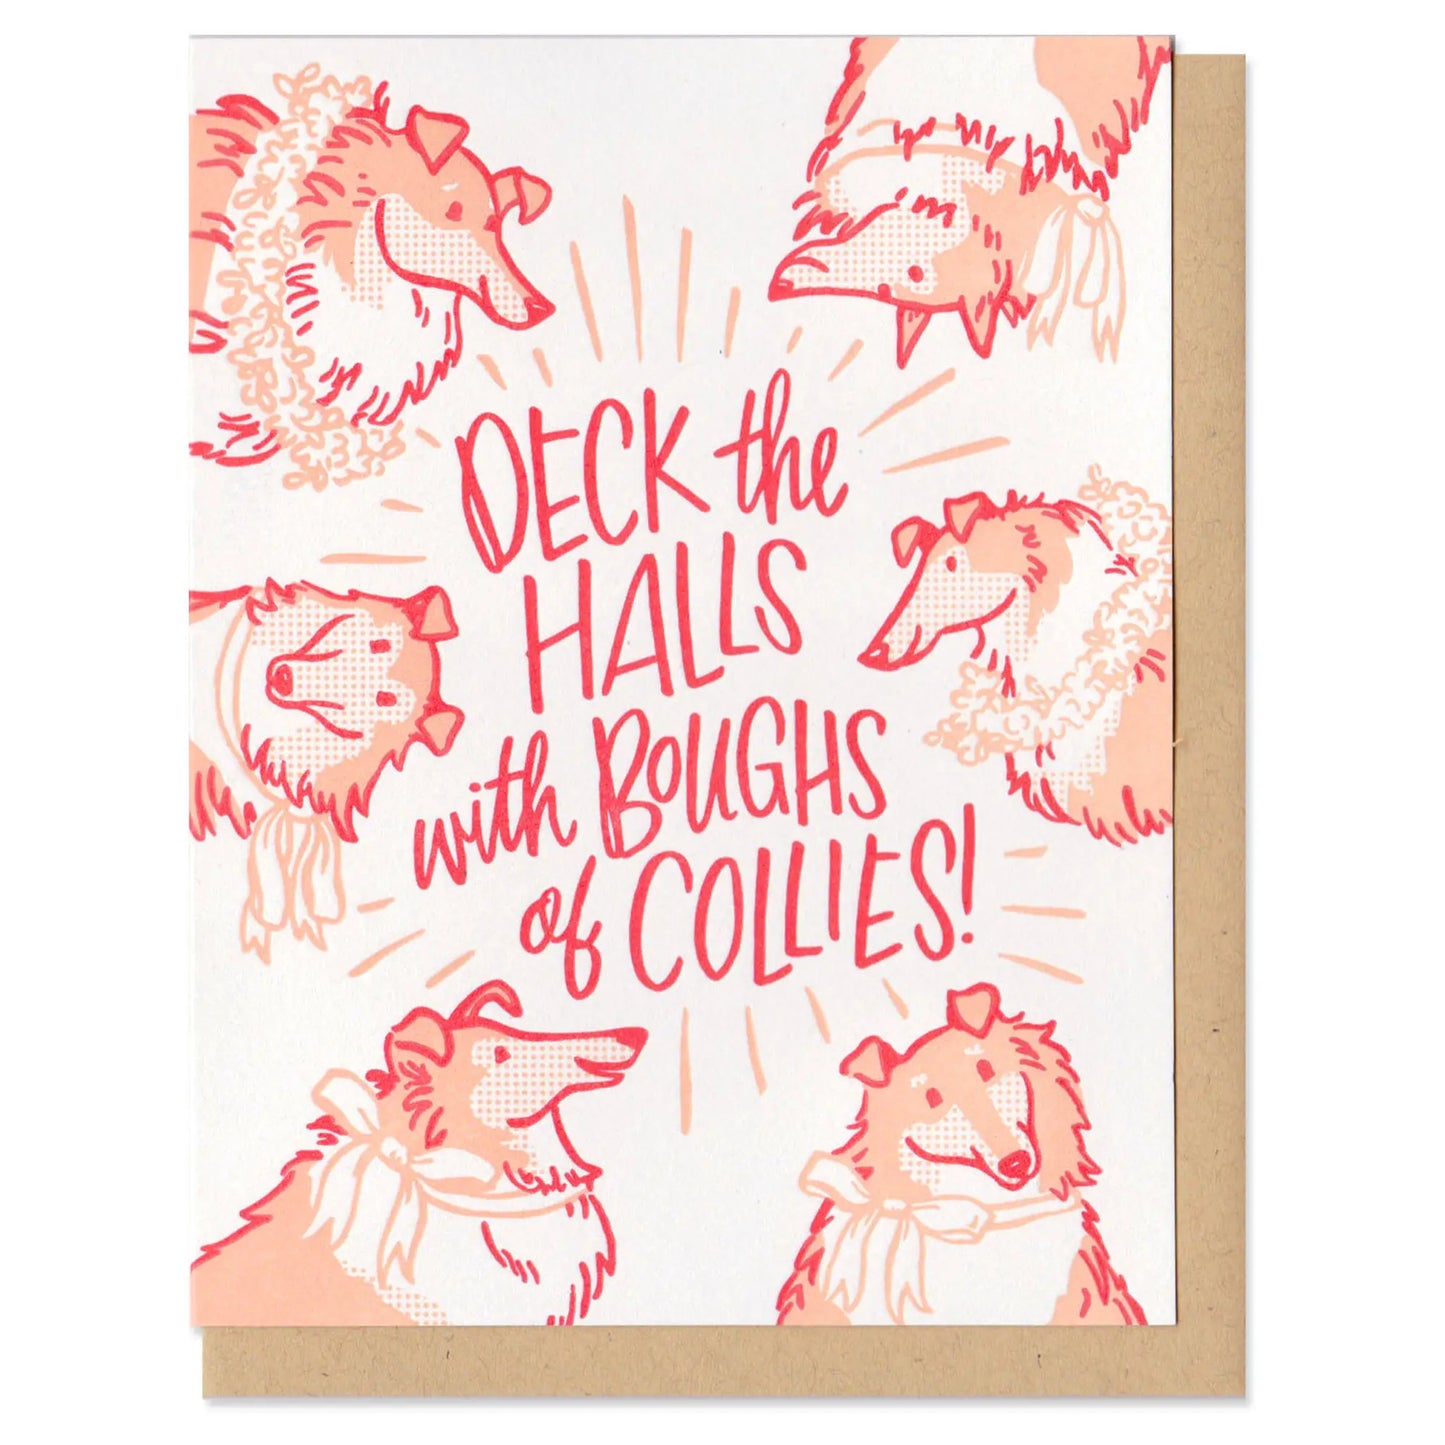 Boughs of Collies Greeting Card